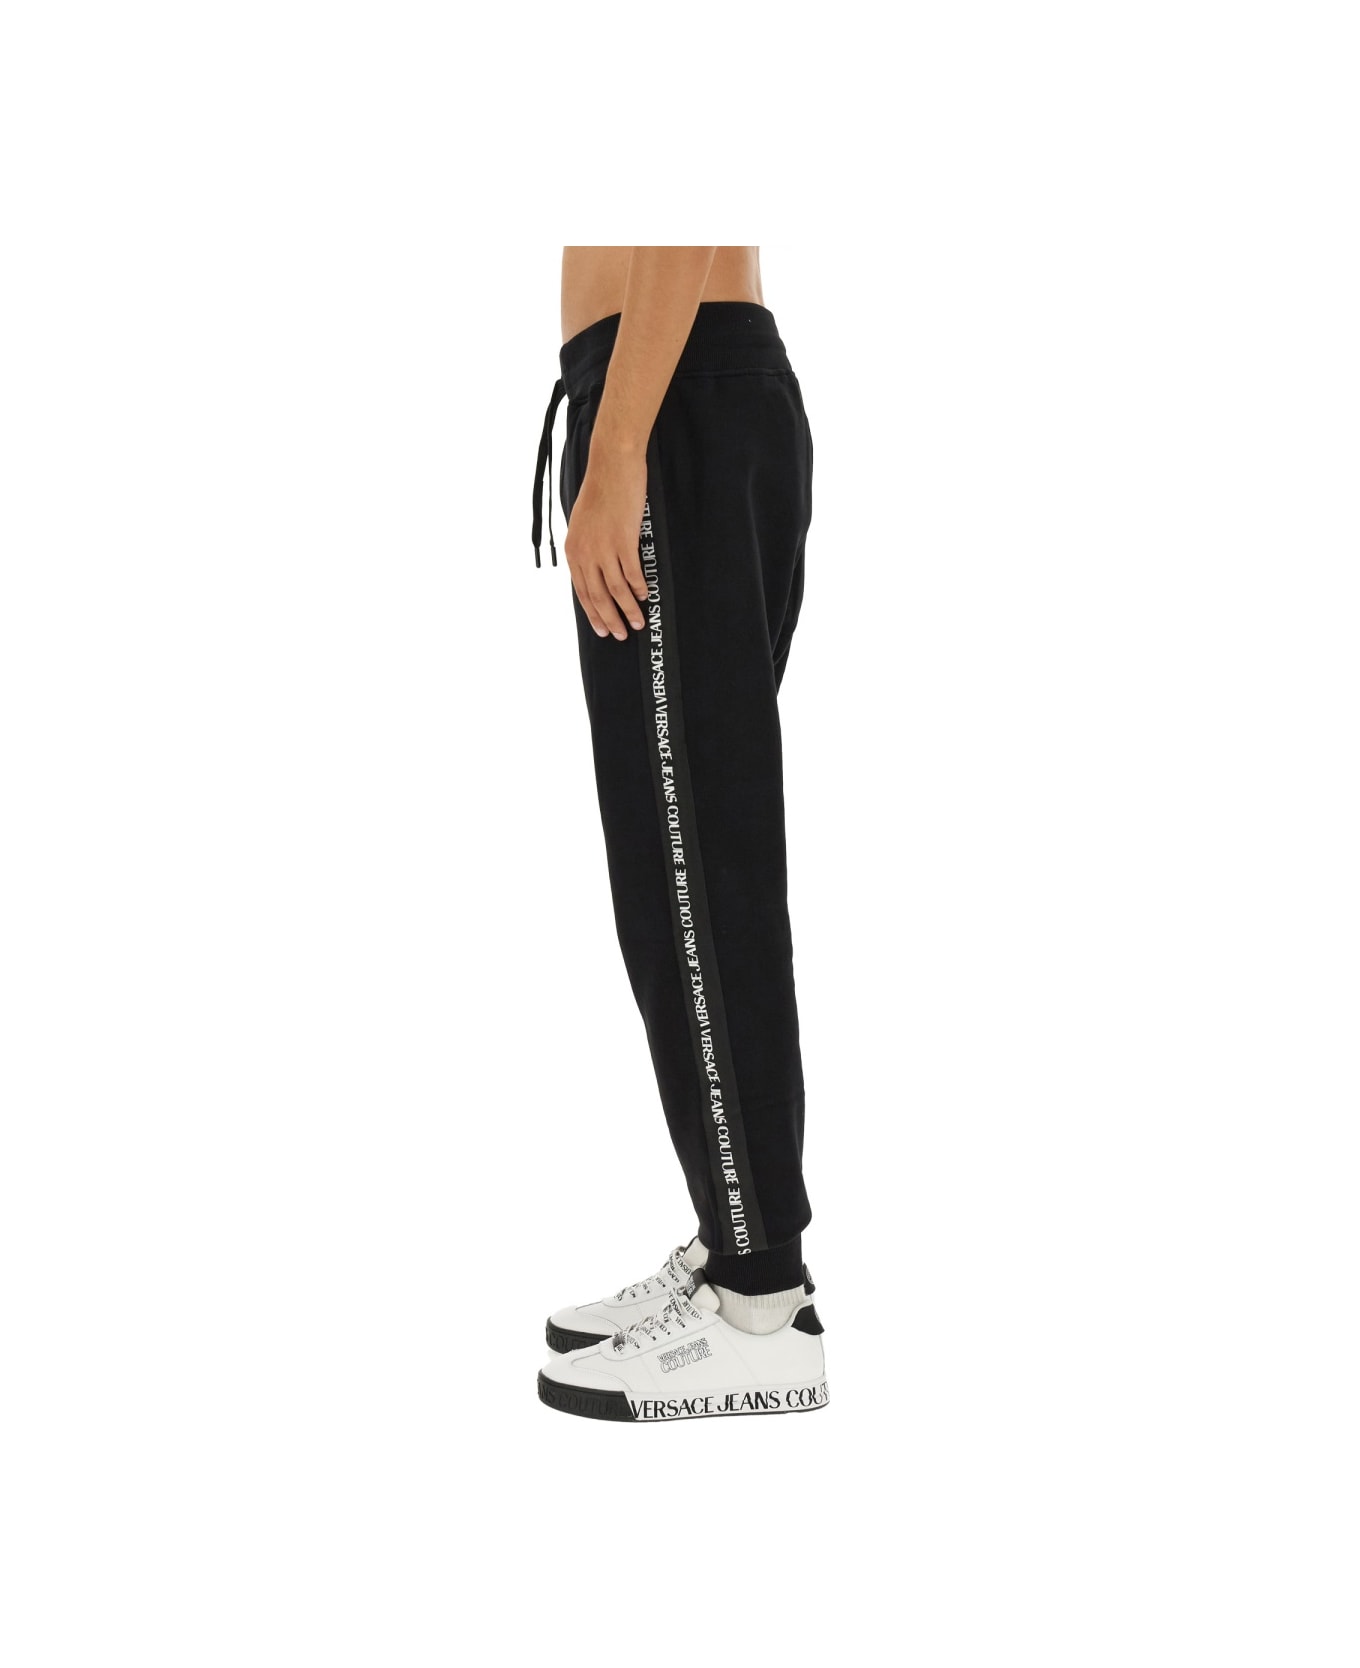 Versace Jeans Couture Sweatpants With Branded Side Stripes - BLACK